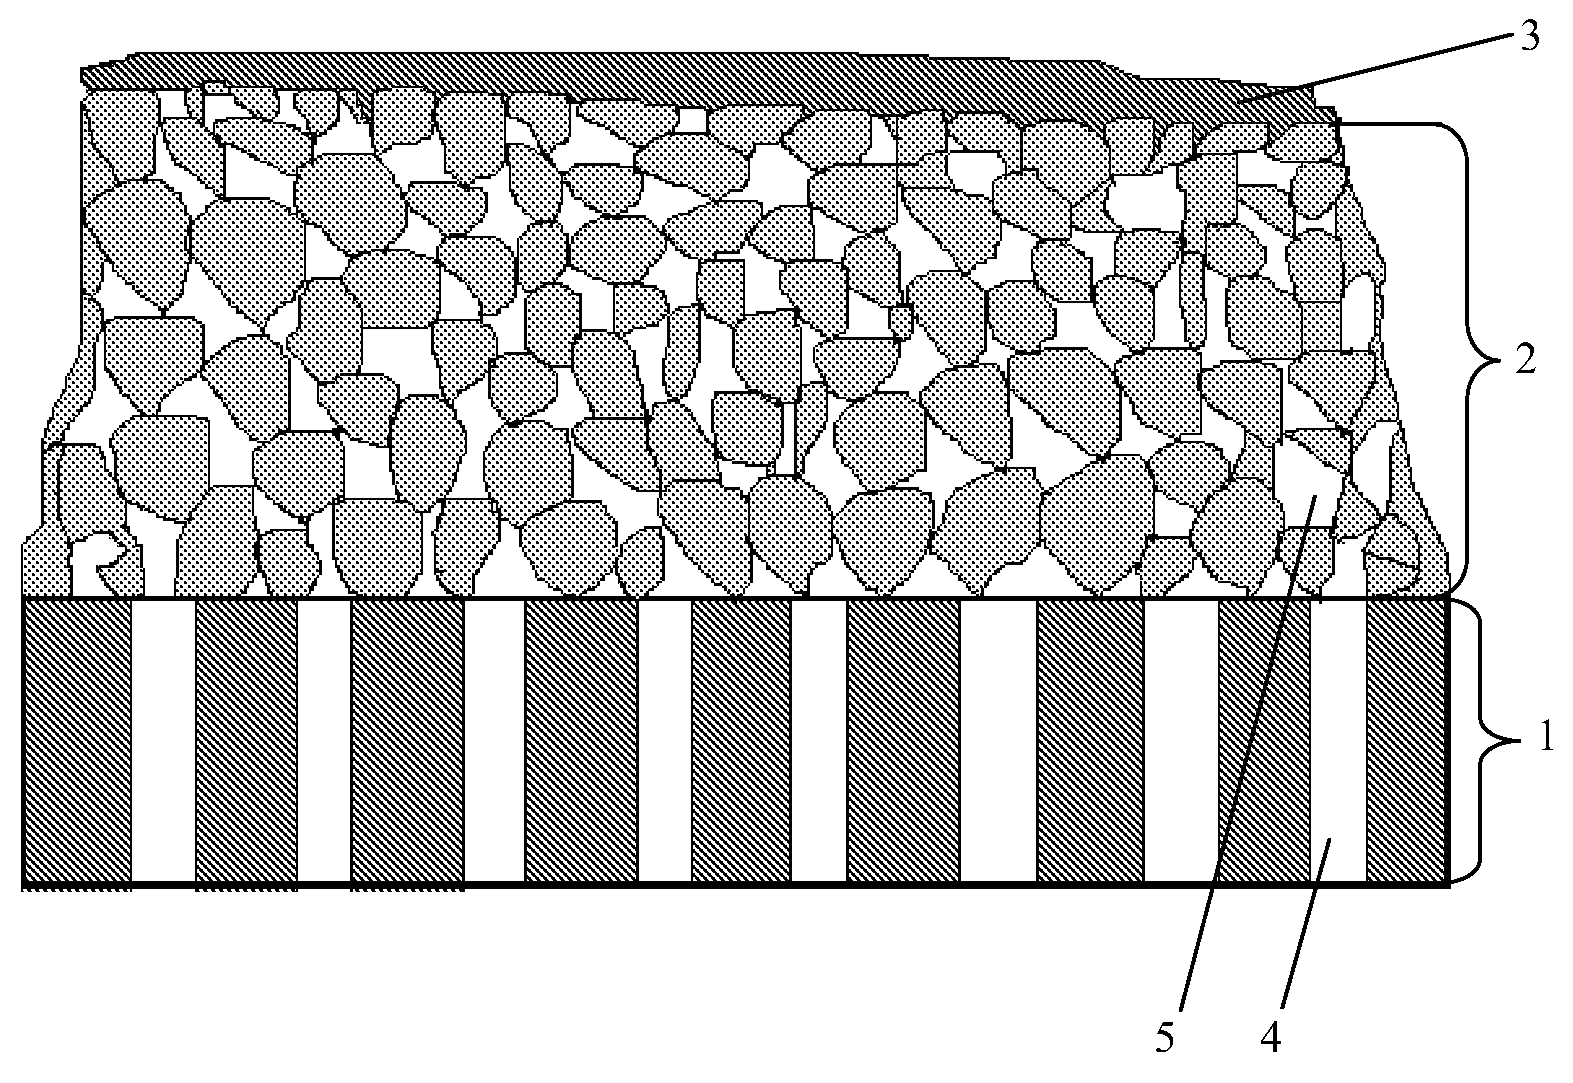 Composite inorganic membrane for separation in fluid systems